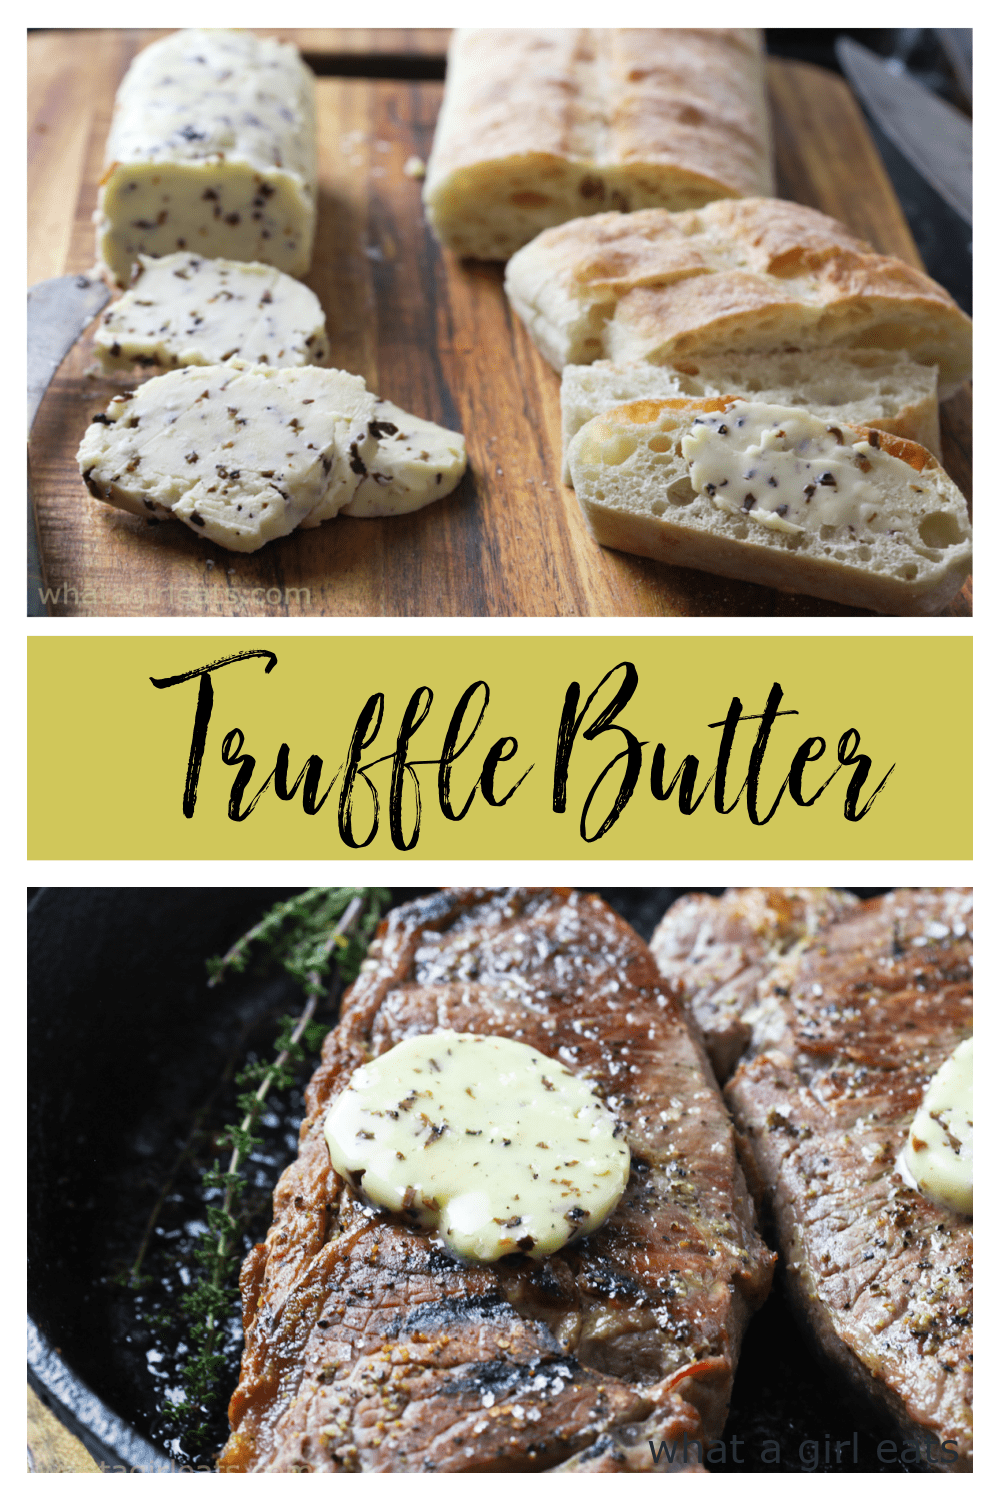 Truffle butter is a compound butter that's delicious on steak, bread or pasta. This easy to make condiment will elevate a variety of dishes!